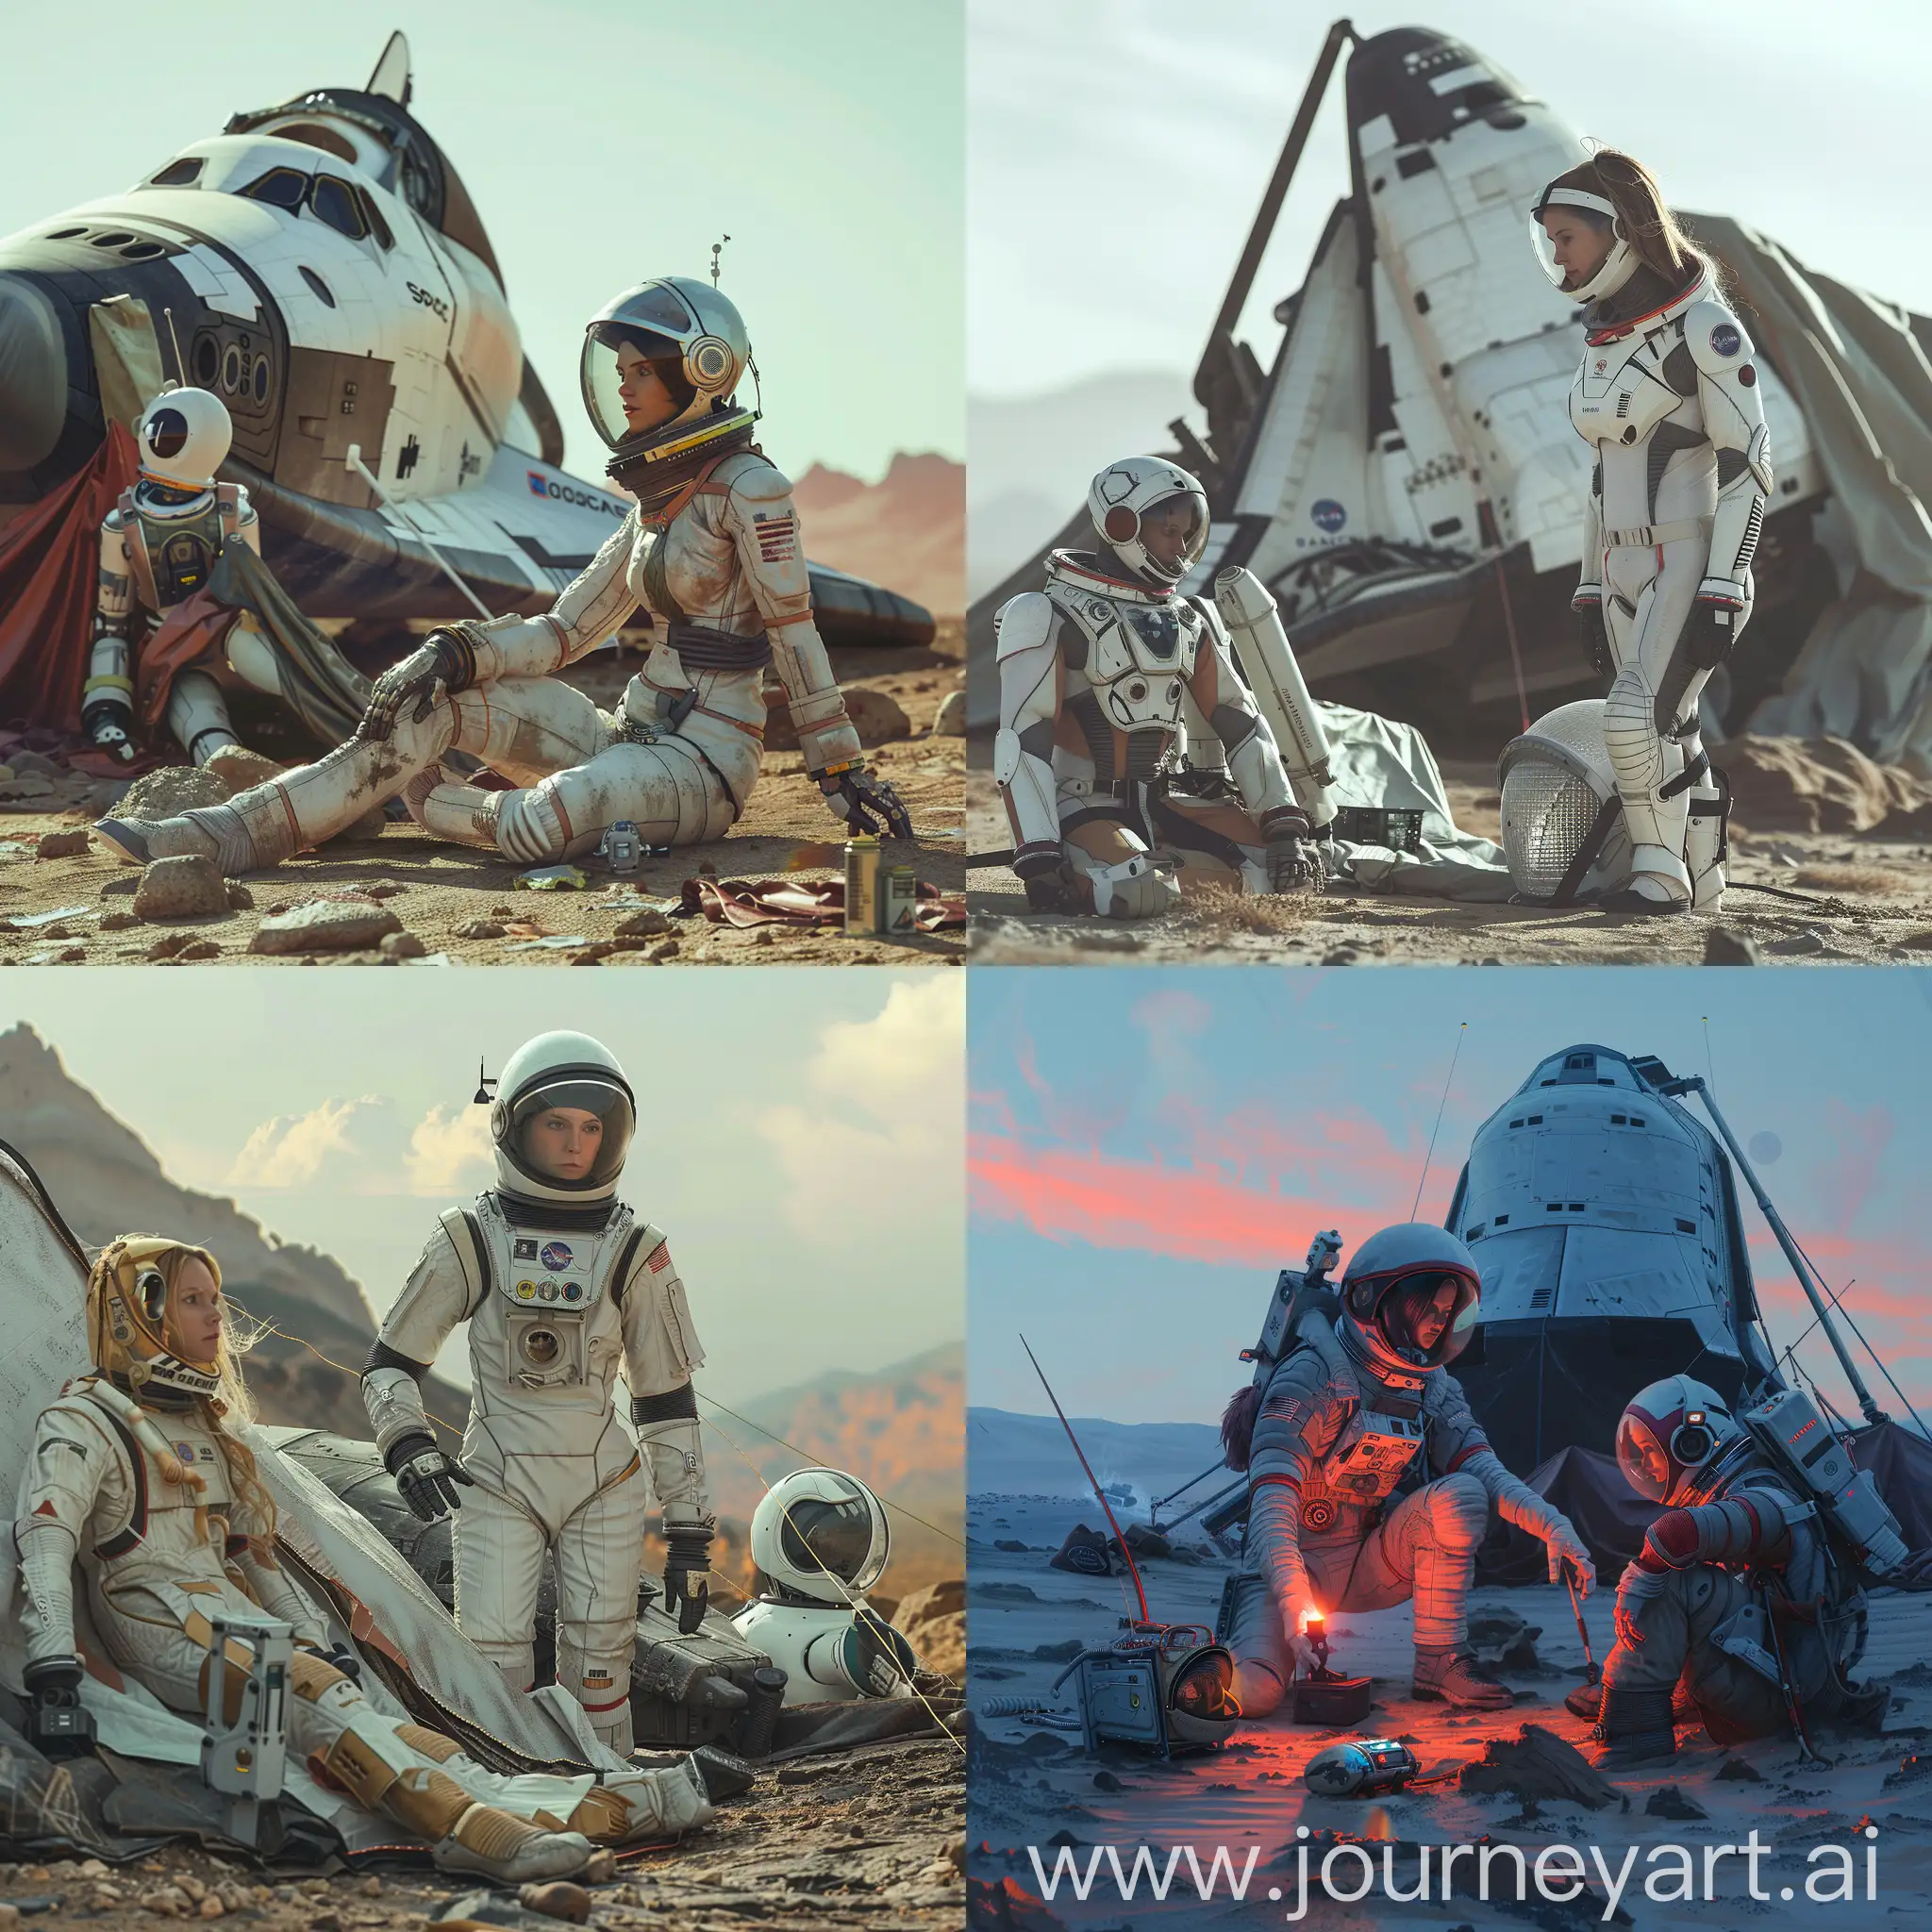 Female-Astronaut-Camping-Beside-Crashed-Space-Shuttle-with-Robot-Companion-on-Alien-Planet